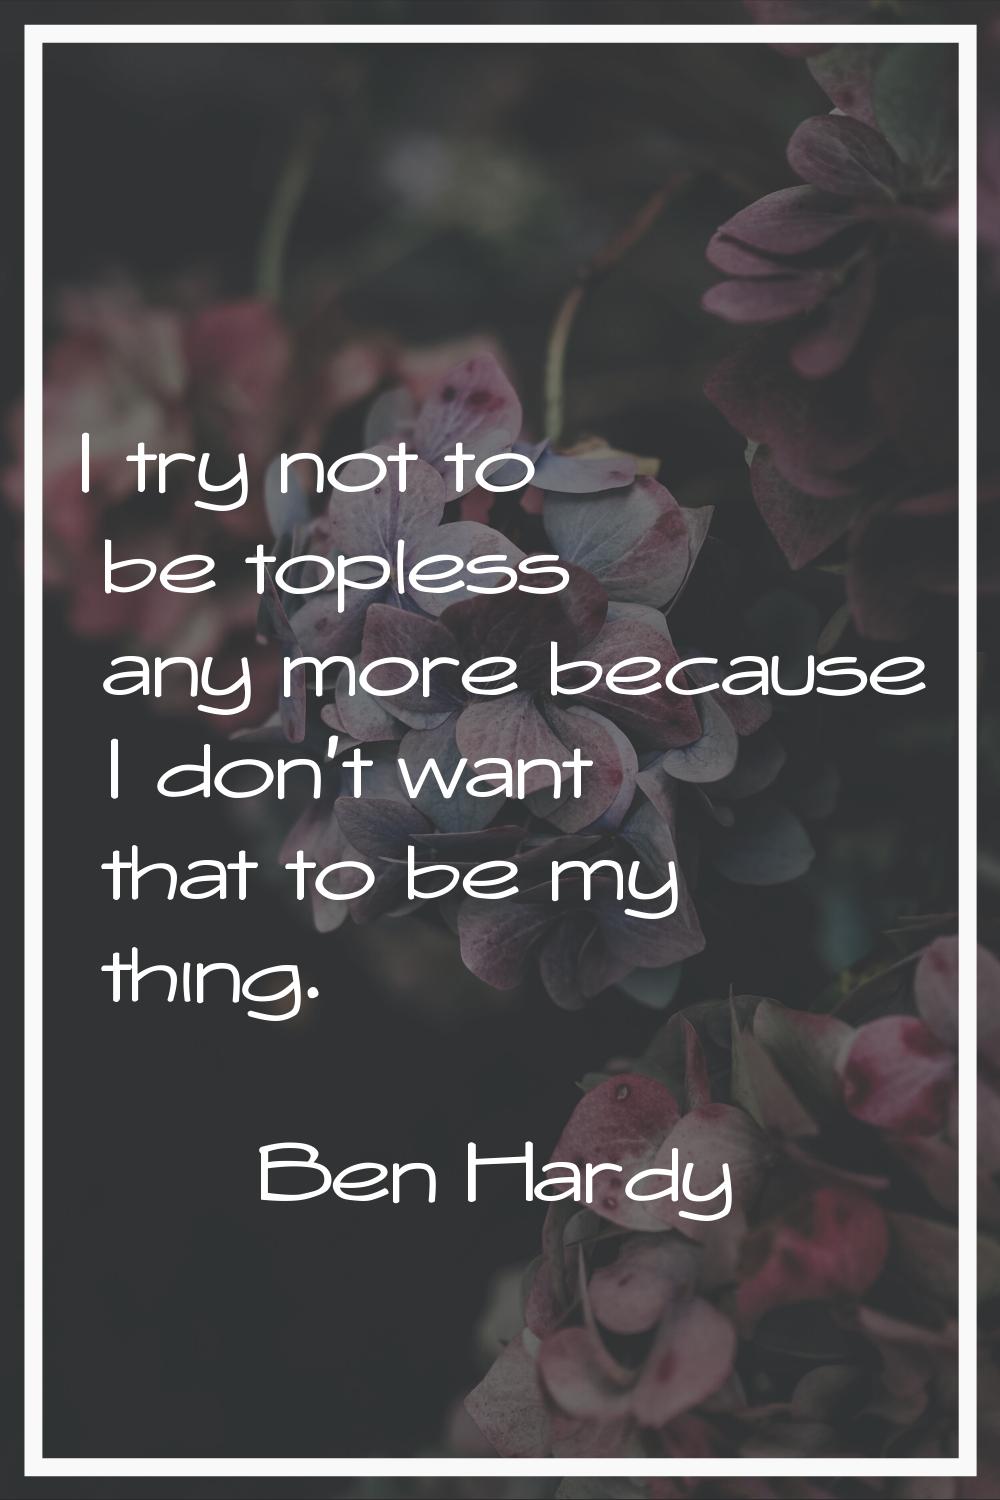 I try not to be topless any more because I don't want that to be my thing.